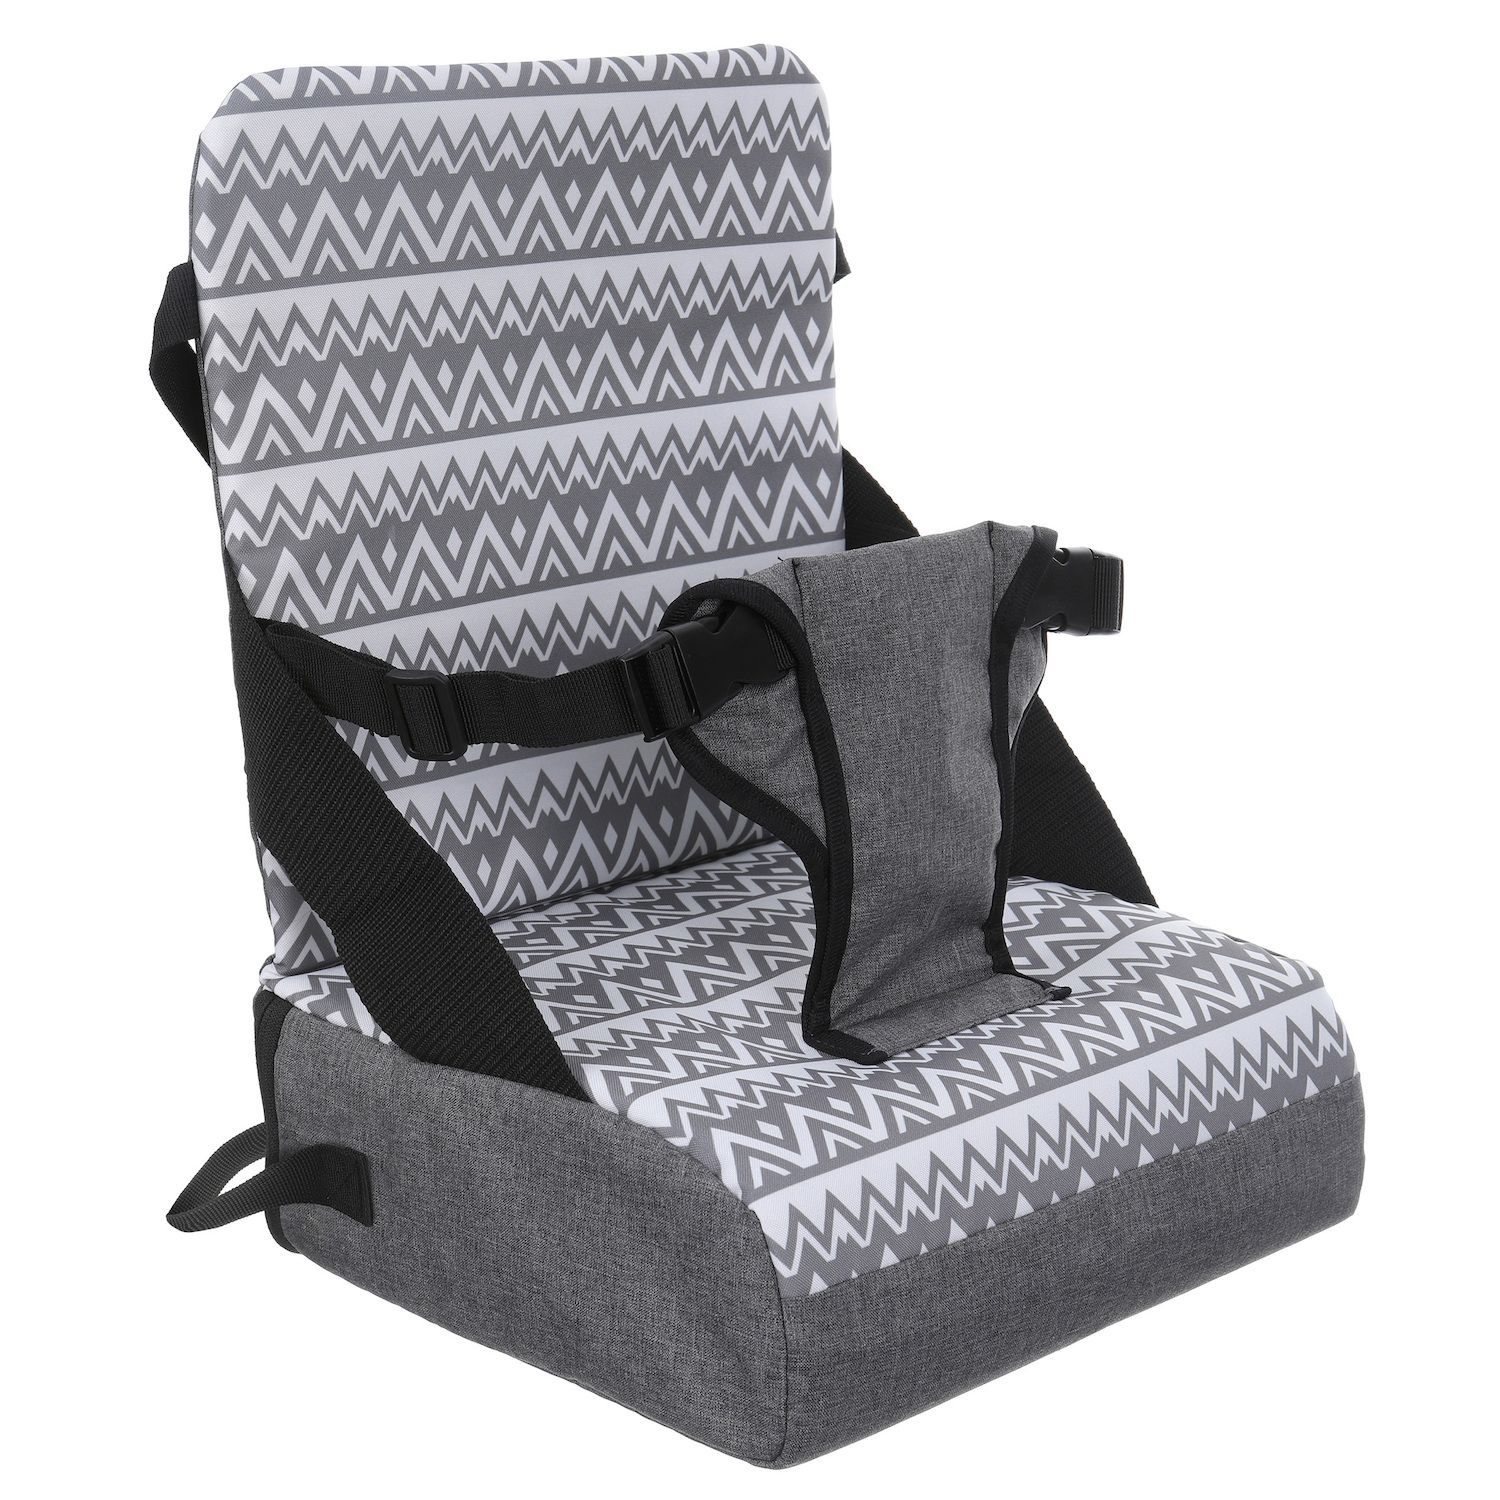 Image for Dreambaby Grab 'N Go Booster Seat at Kohl's.